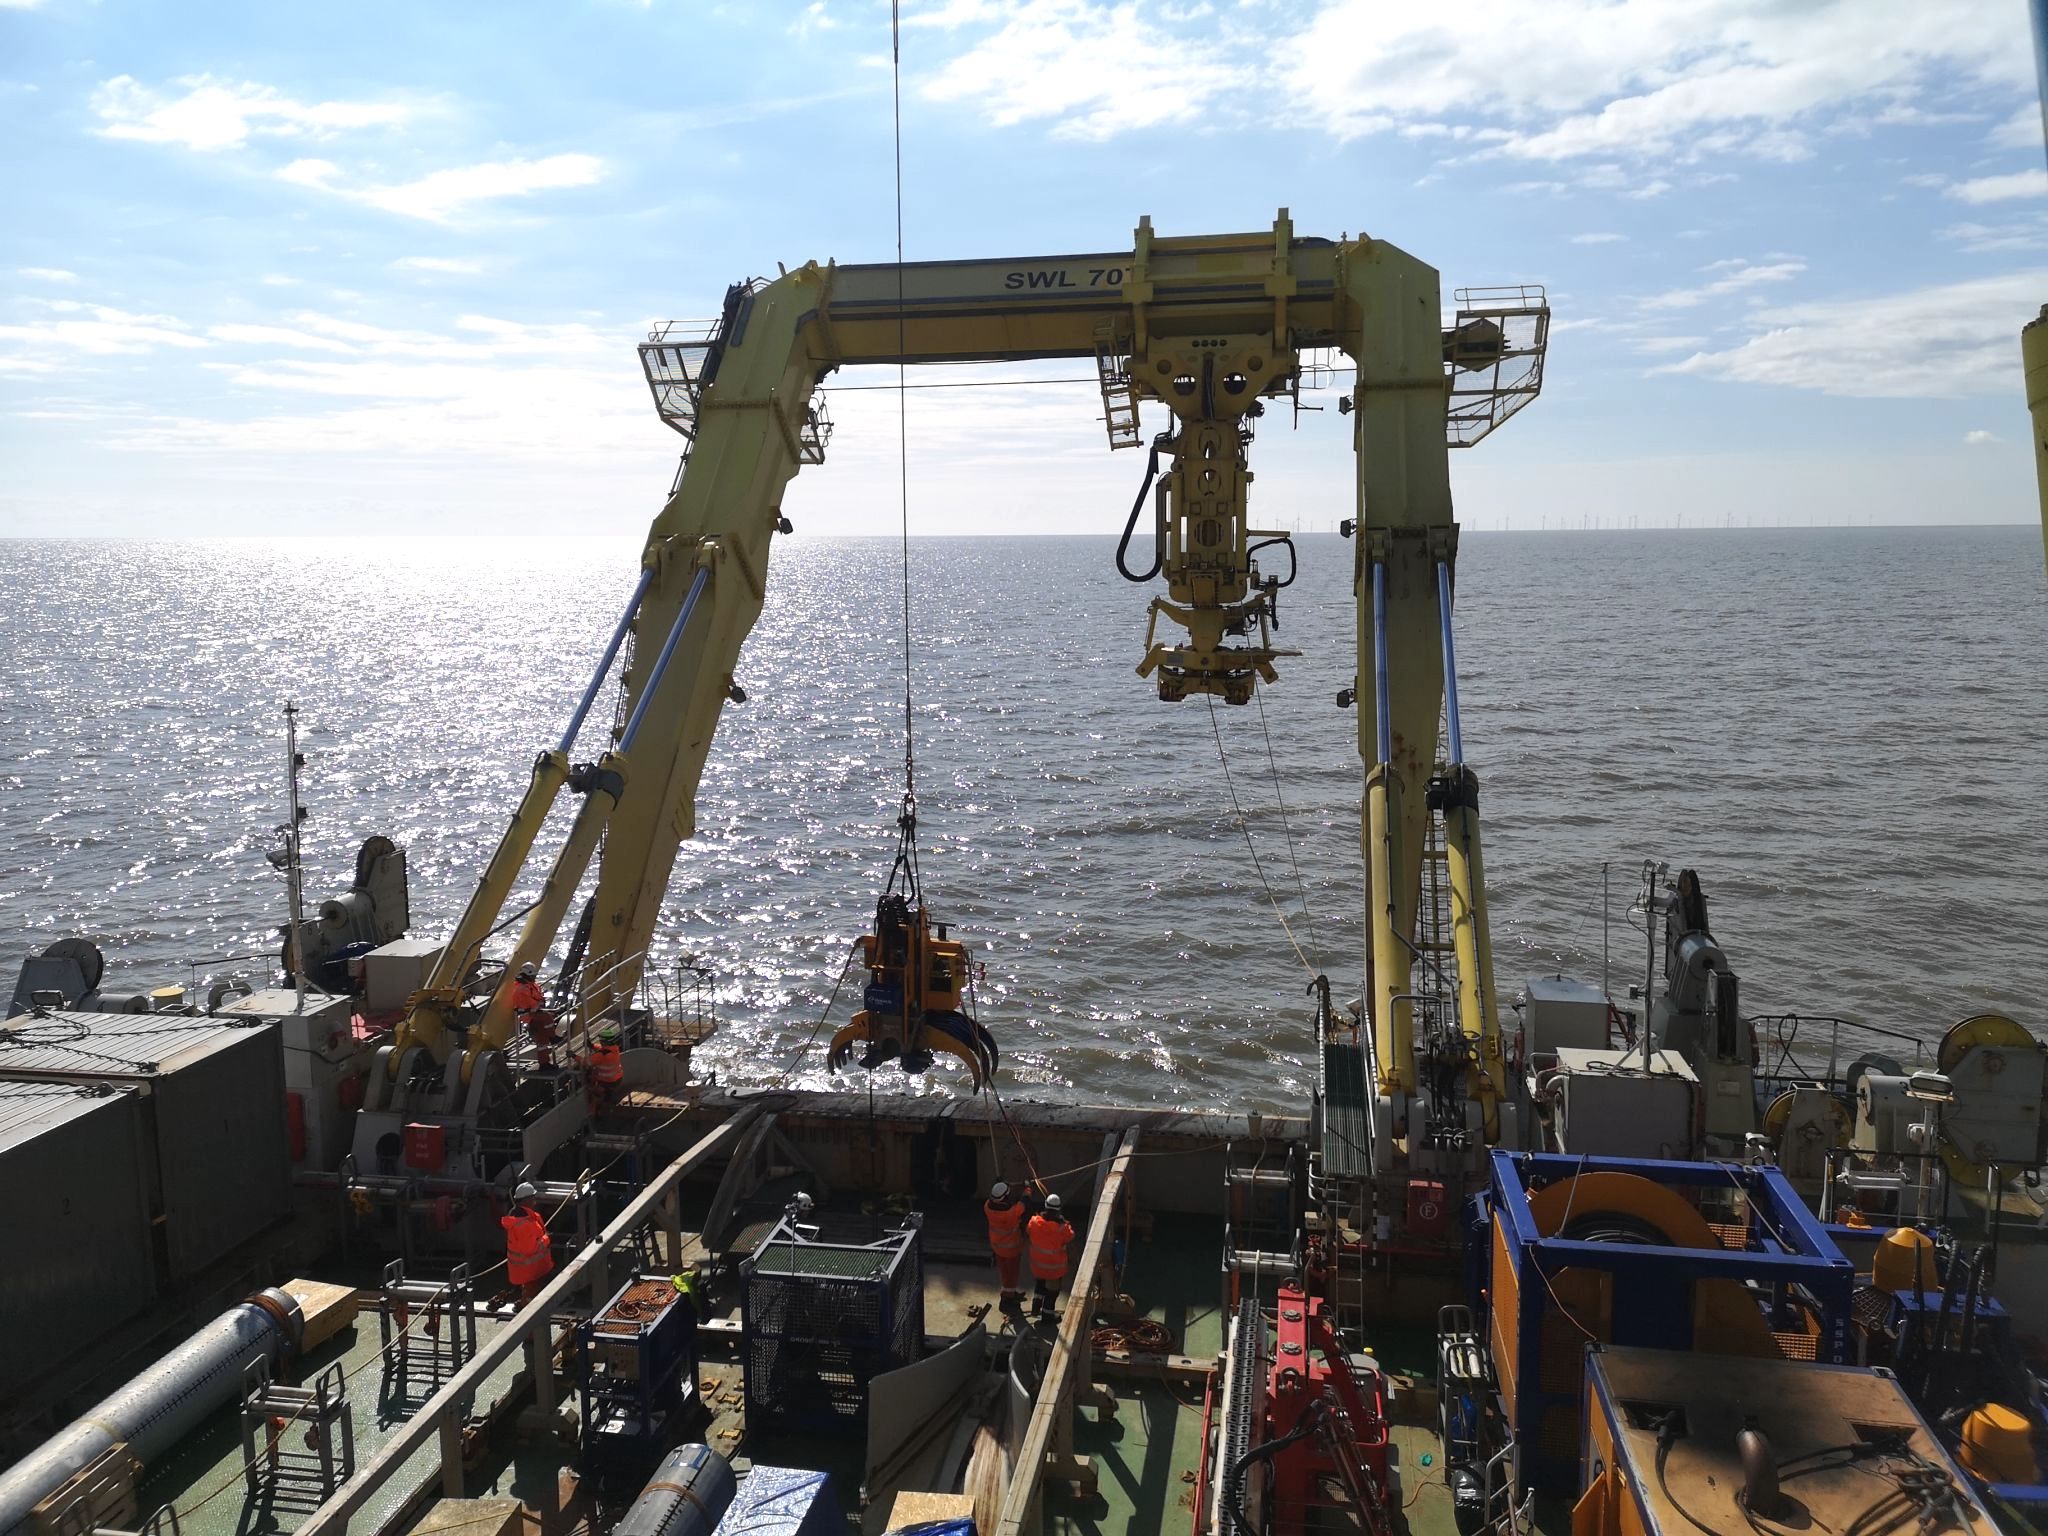 Rotech Concludes "Challenging" Gig at Triton Knoll Offshore Wind Farm